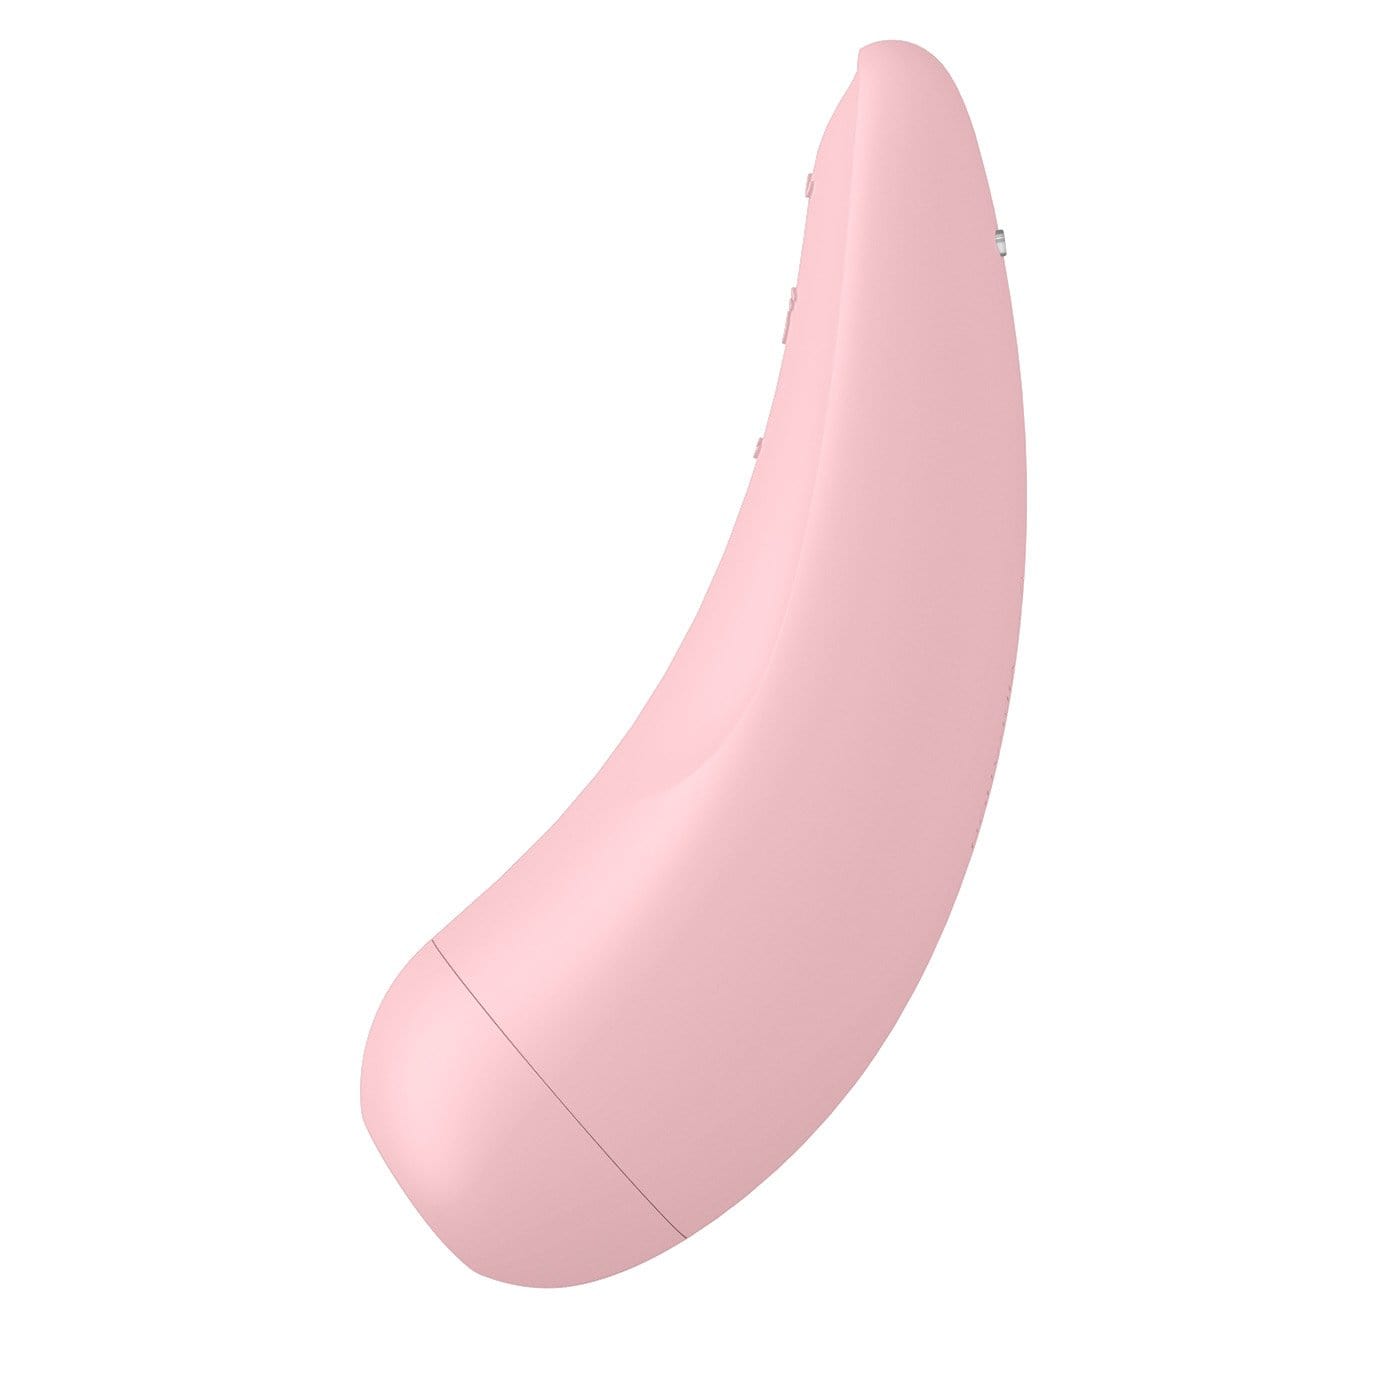 Satisfyer - Curvy 2+ App-Controlled Air Pulse Stimulator Vibrator (Pink) -  Clit Massager (Vibration) Rechargeable  Durio.sg